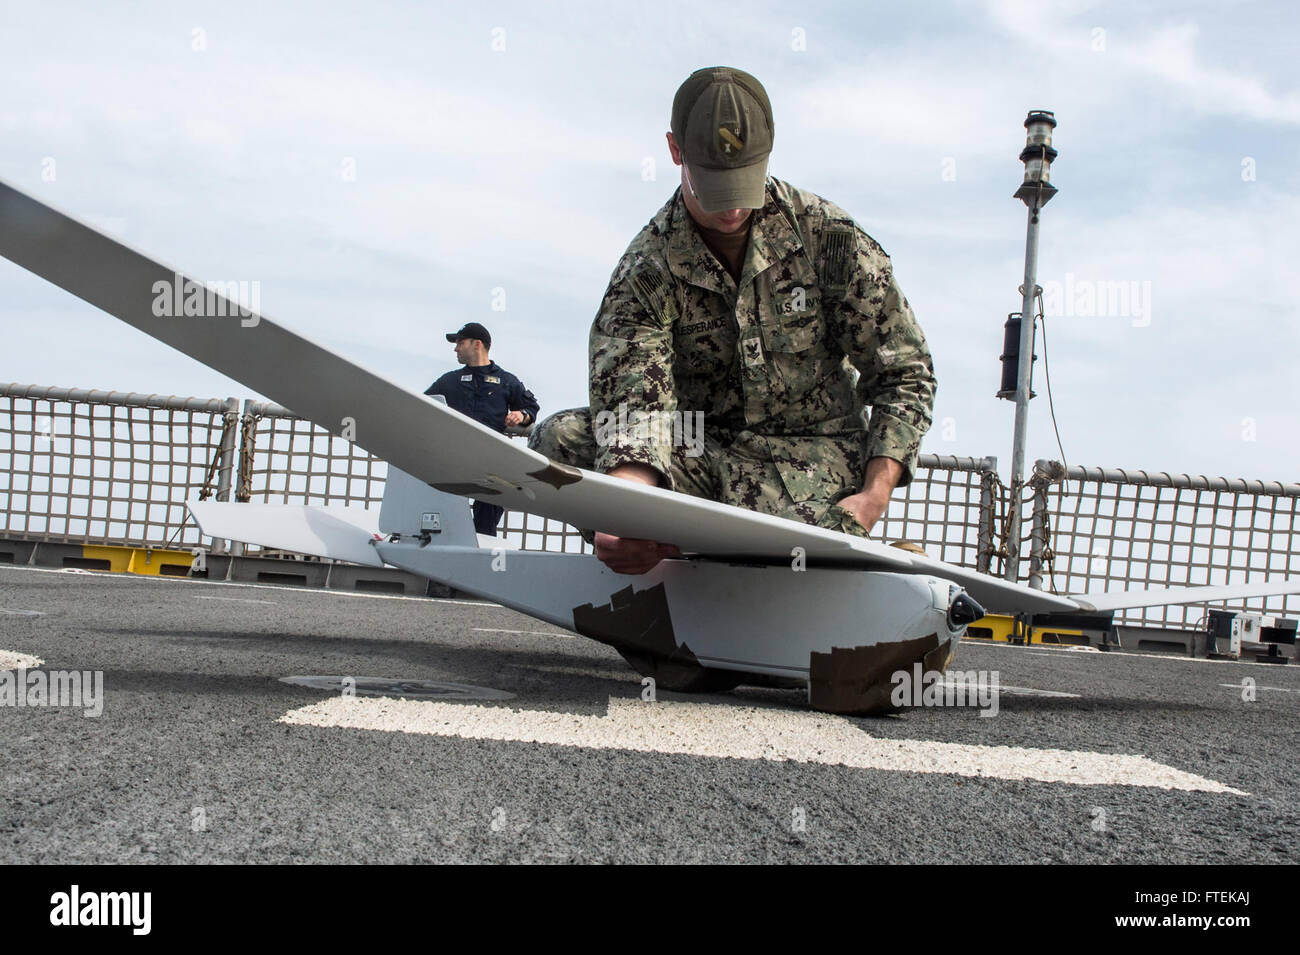 150116-N-JP249-016 ATLANTIC OCEAN (Jan. 16, 2015) Intelligence Specialist 2nd Class Joshua Lesperance, from Spring Valley, Illinois, pieces together a Puma Unmanned Aircraft System from the Coastal Riverine Force, while aboard the Military Sealift Command’s joint high-speed vessel USNS Spearhead (JHSV 1) Jan. 16, 2015. Spearhead is on a scheduled deployment to the U.S. 6th Fleet area of operations in support of the international collaborative capacity-building program Africa Partnership Station. (U.S. Navy photo by Mass Communication Specialist 2nd Class Kenan O’Connor/Released) Stock Photo